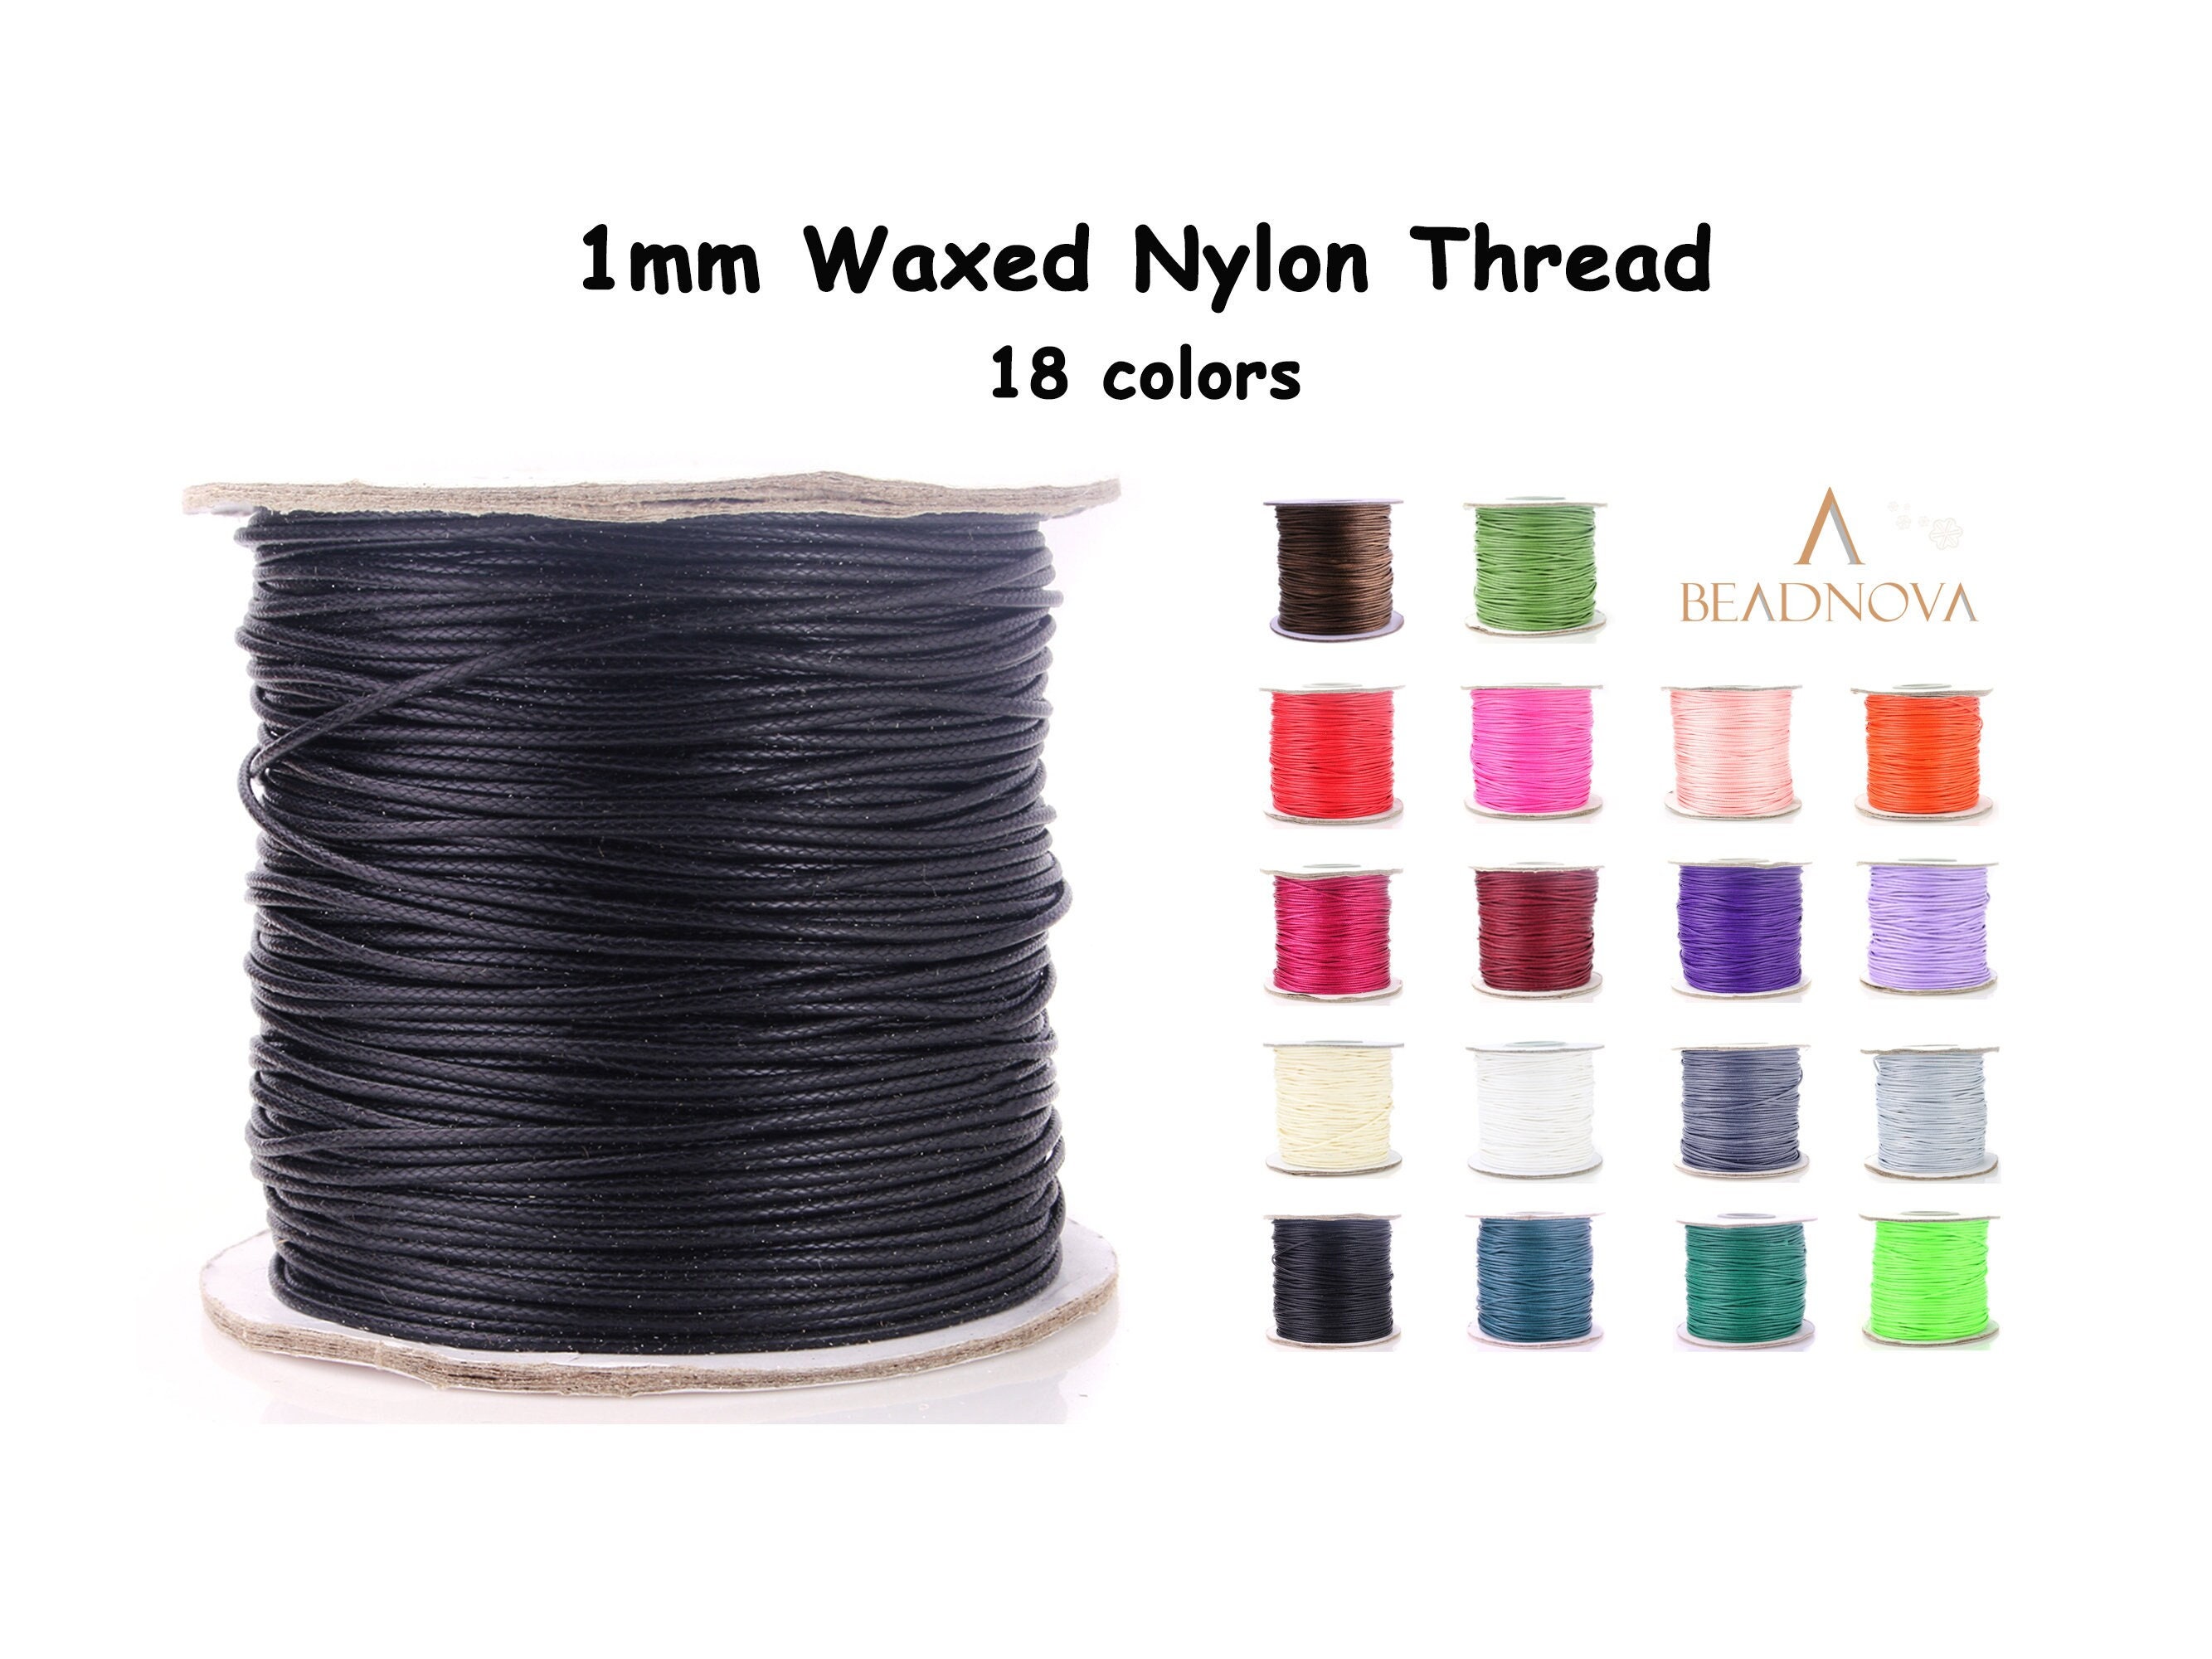 0.45mm Elastic Thread Cord for Shirring Fabric Sewing jewelry